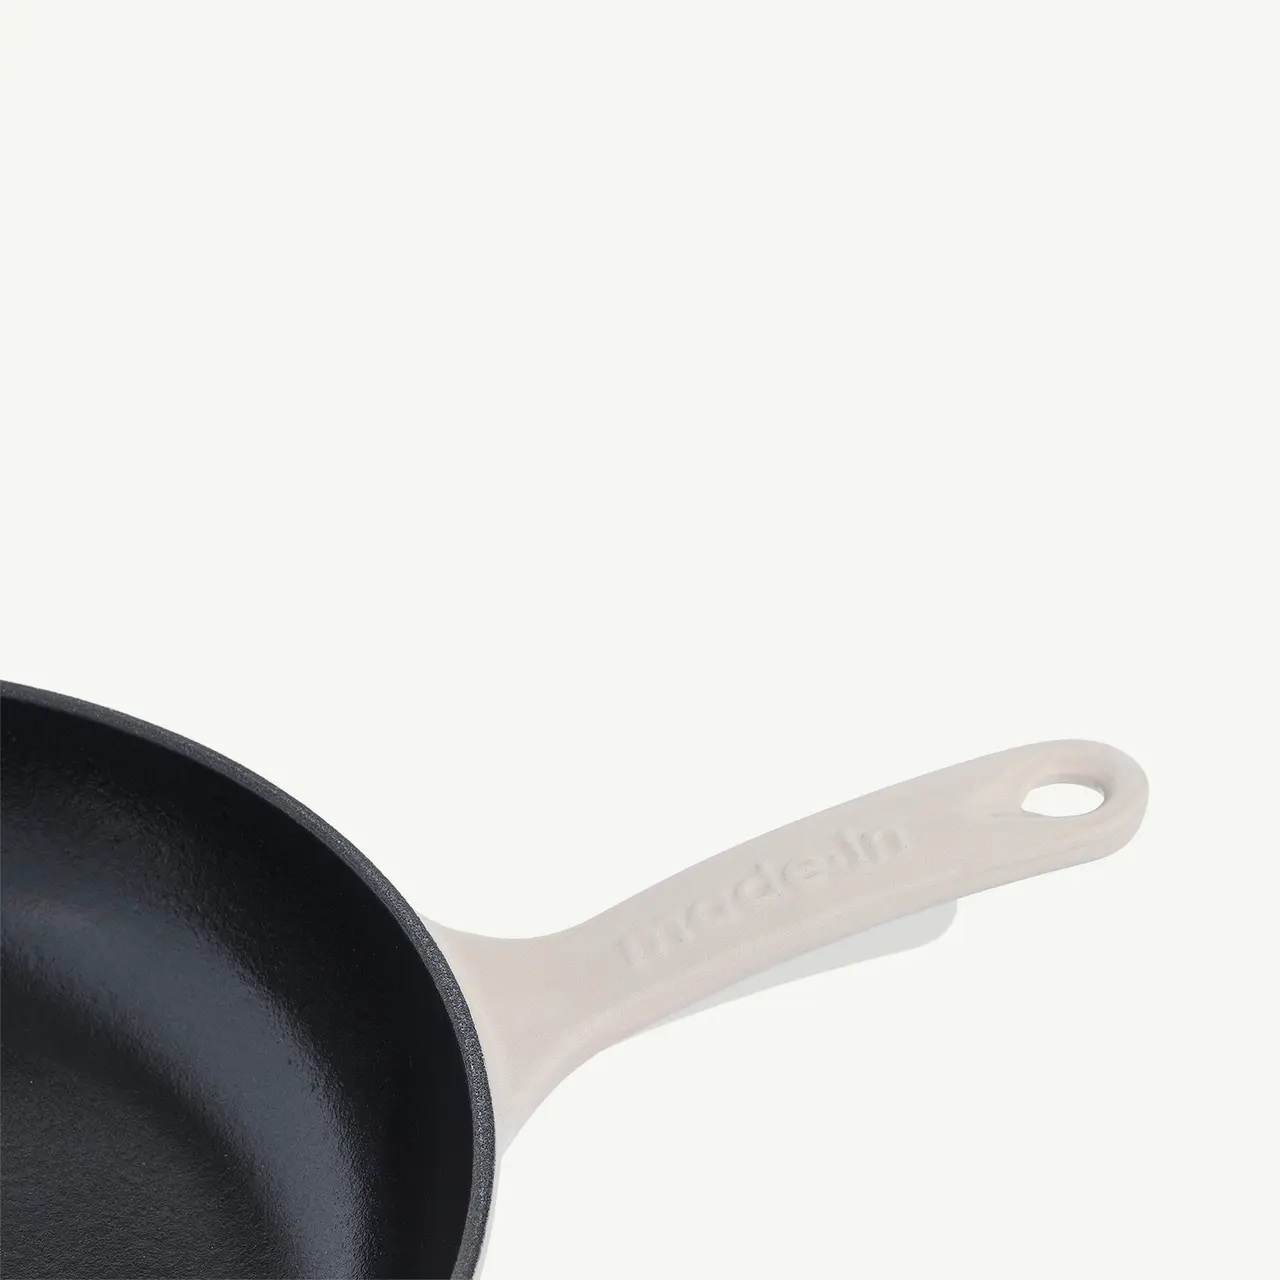 A black cast iron skillet with a light-colored handle positioned diagonally against a white background.